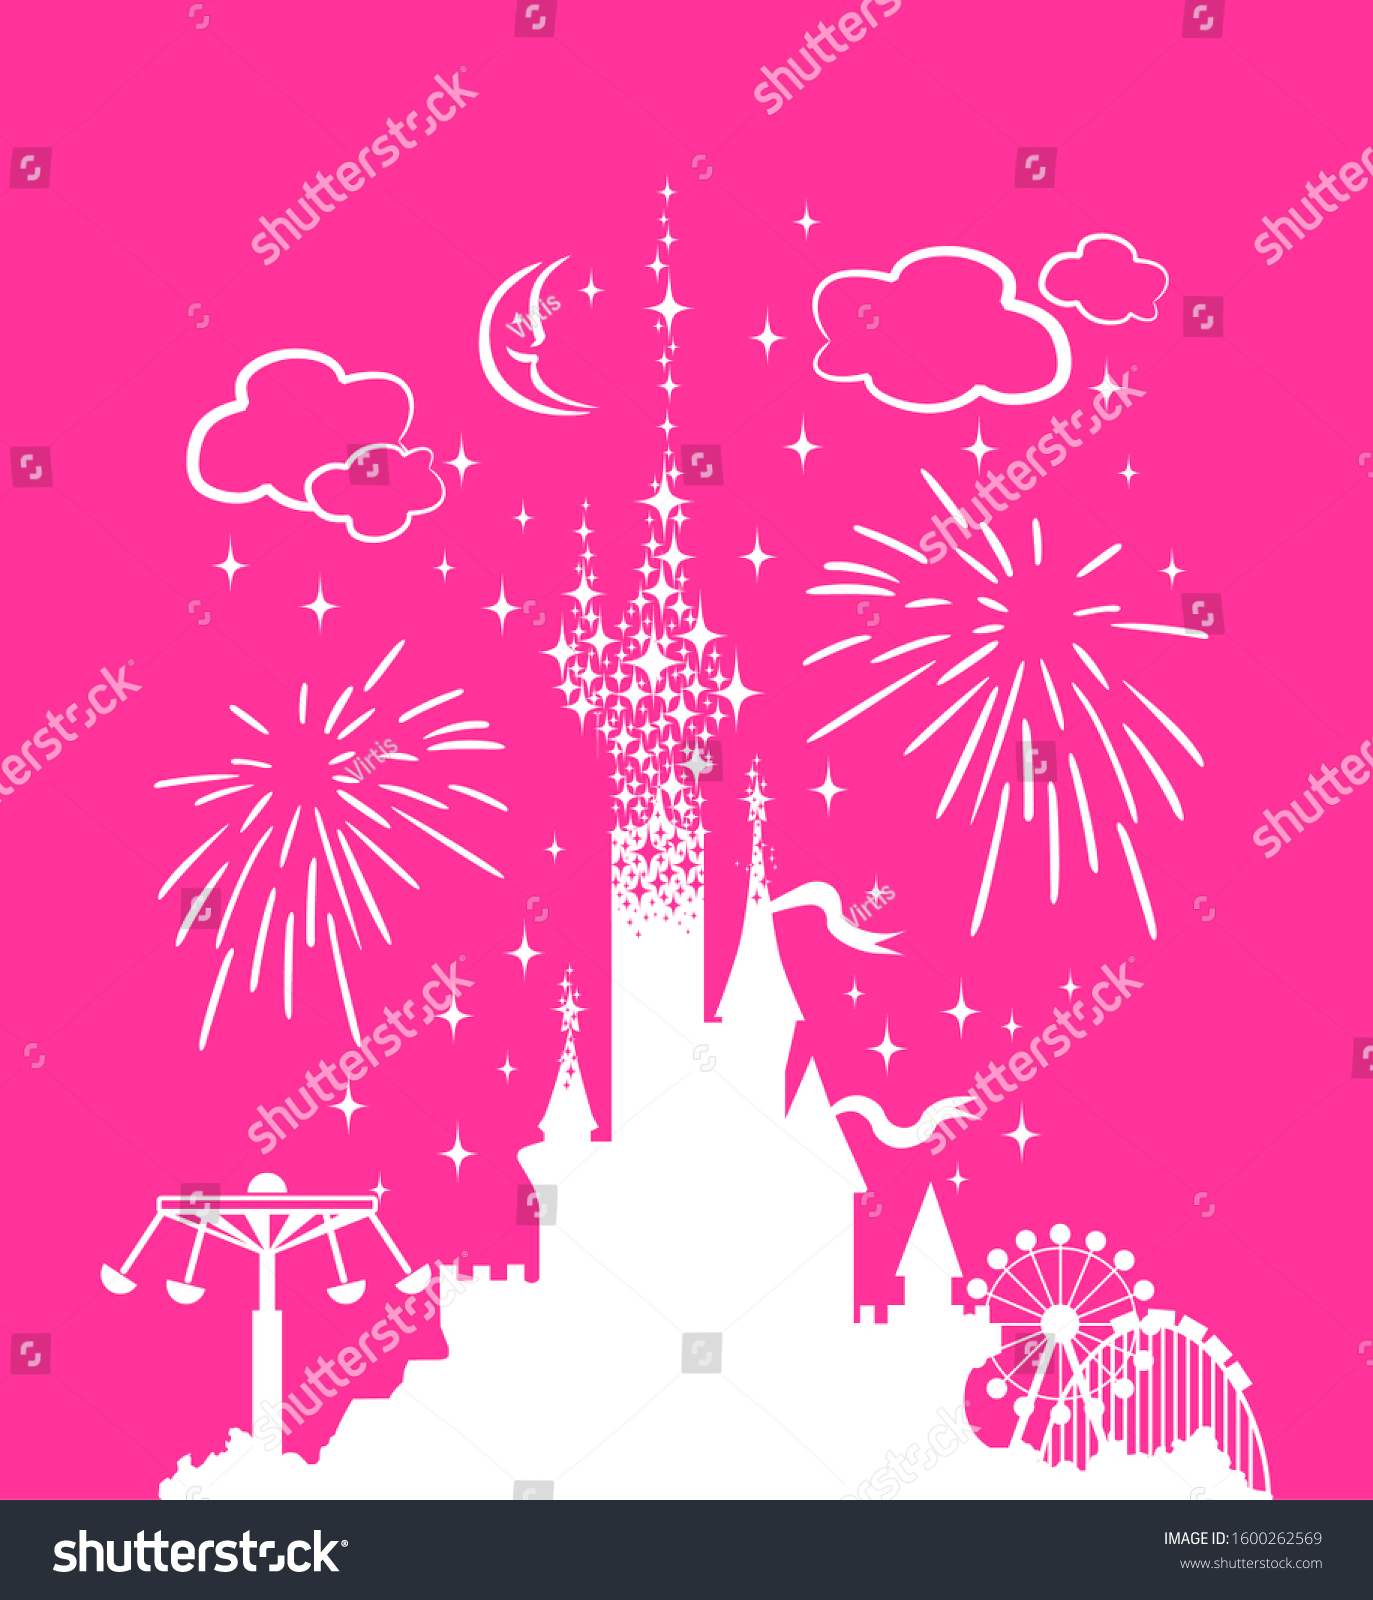 SVG of Princess Castle. Fantasy pink palace on the background of fireworks and stars. Fairytale Royal Medieval Paradise Palace. Cartoon vector illustration. svg